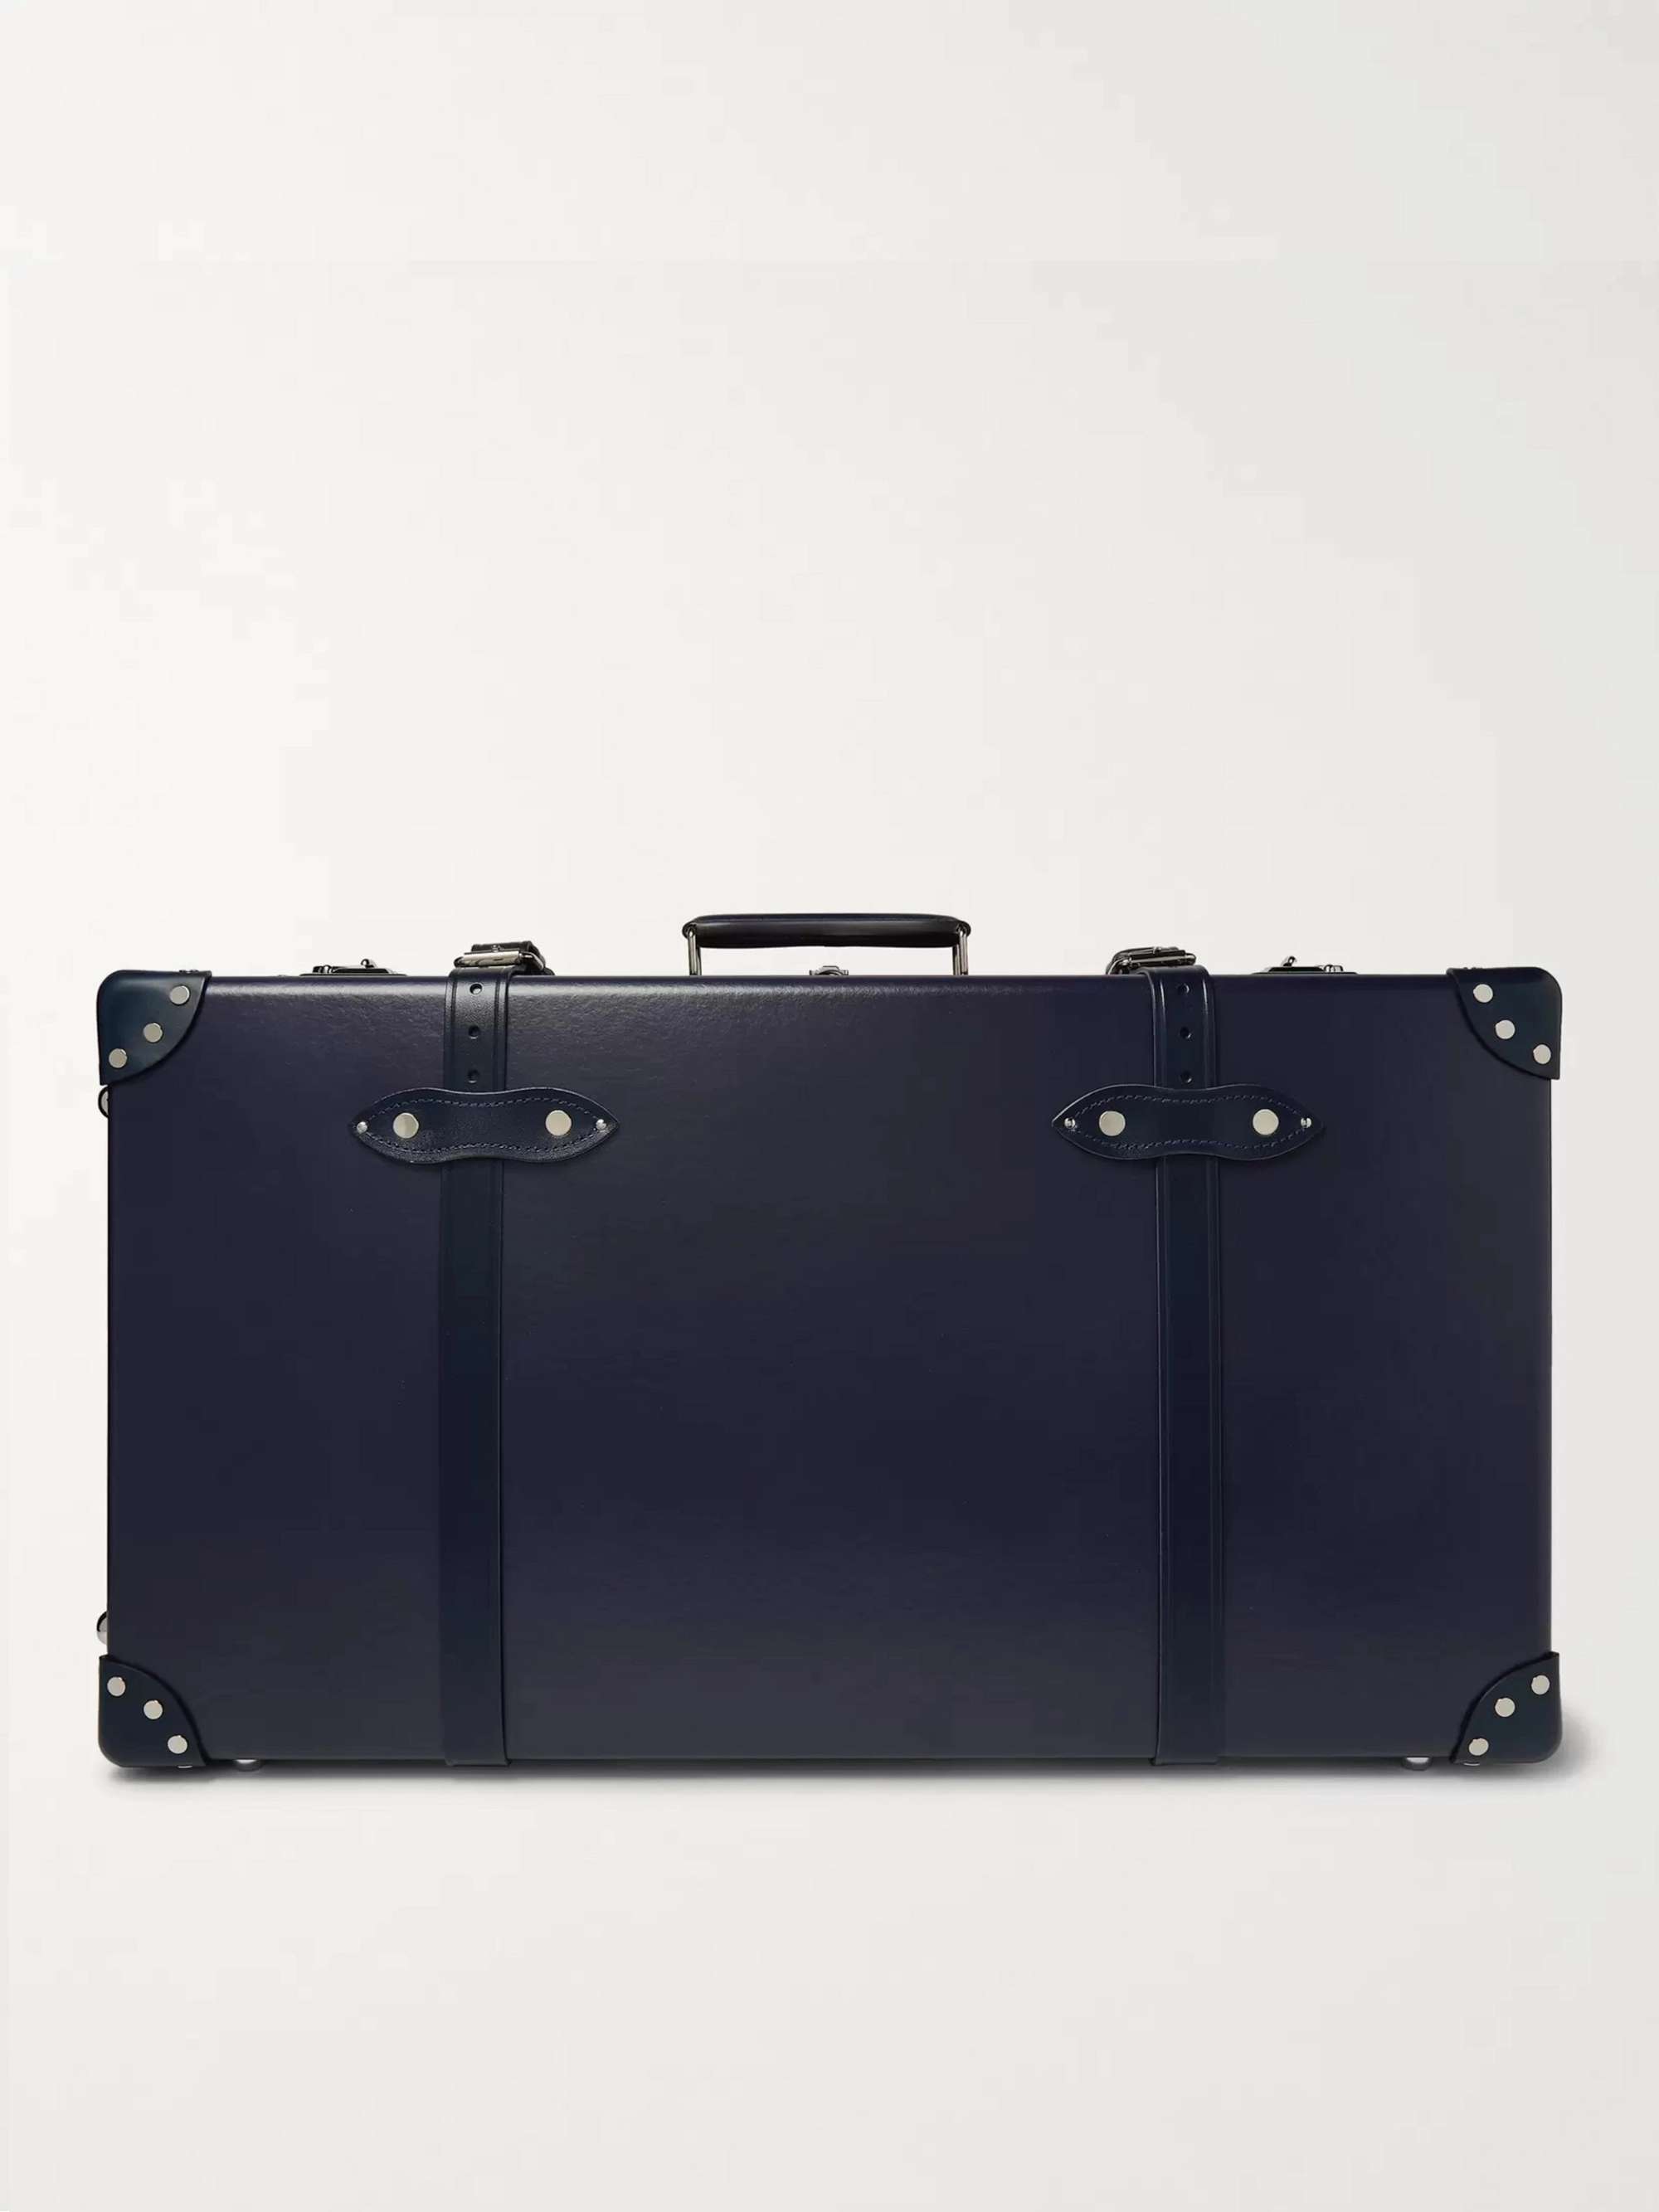 GLOBE-TROTTER 30" Leather-Trimmed Trolley Case